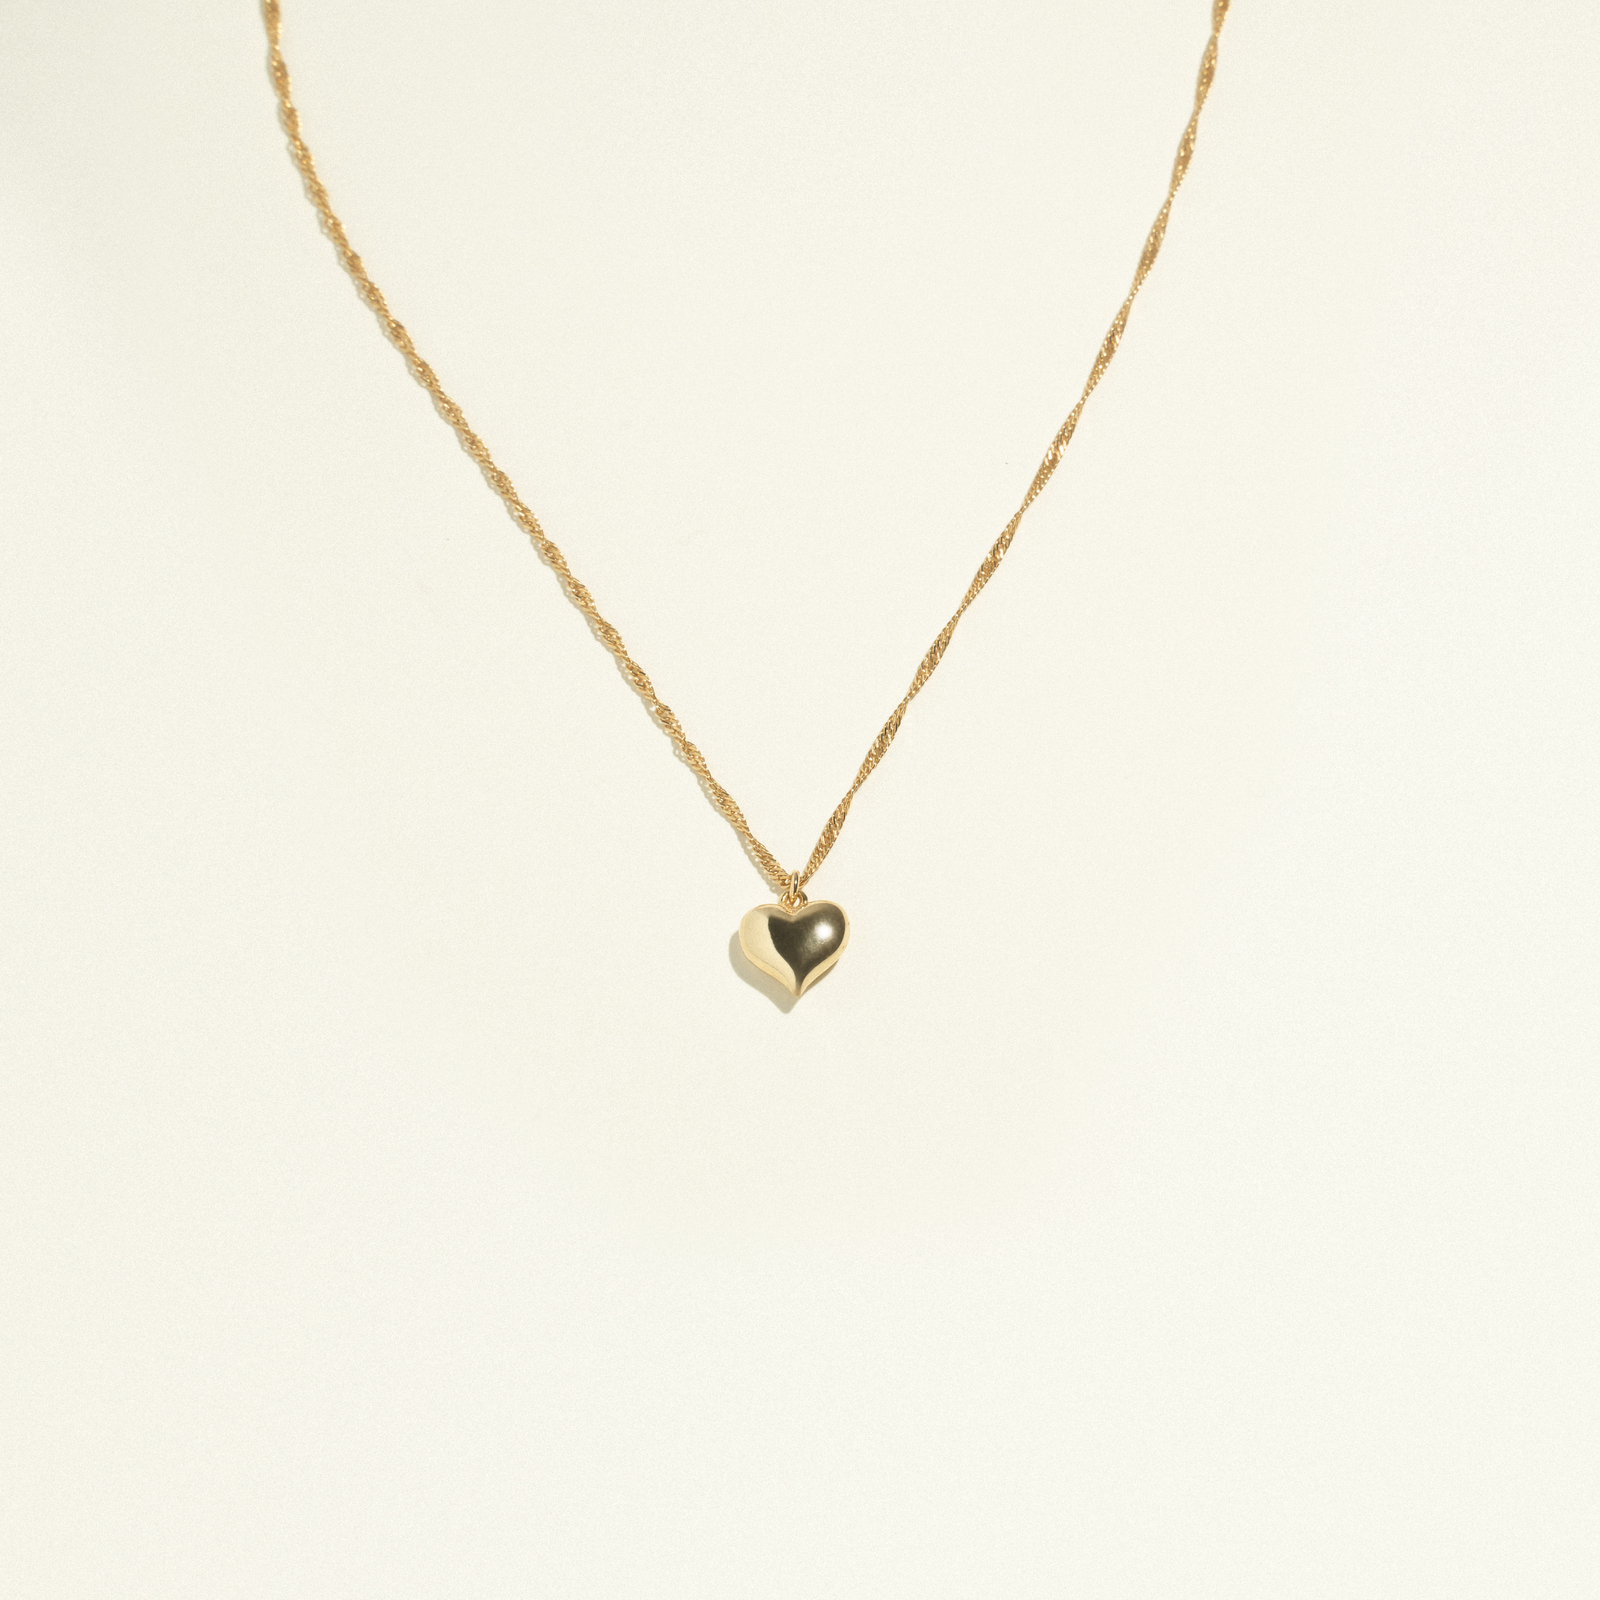 24Kt Gold Plated Heart Singapore Necklace 49.5cm